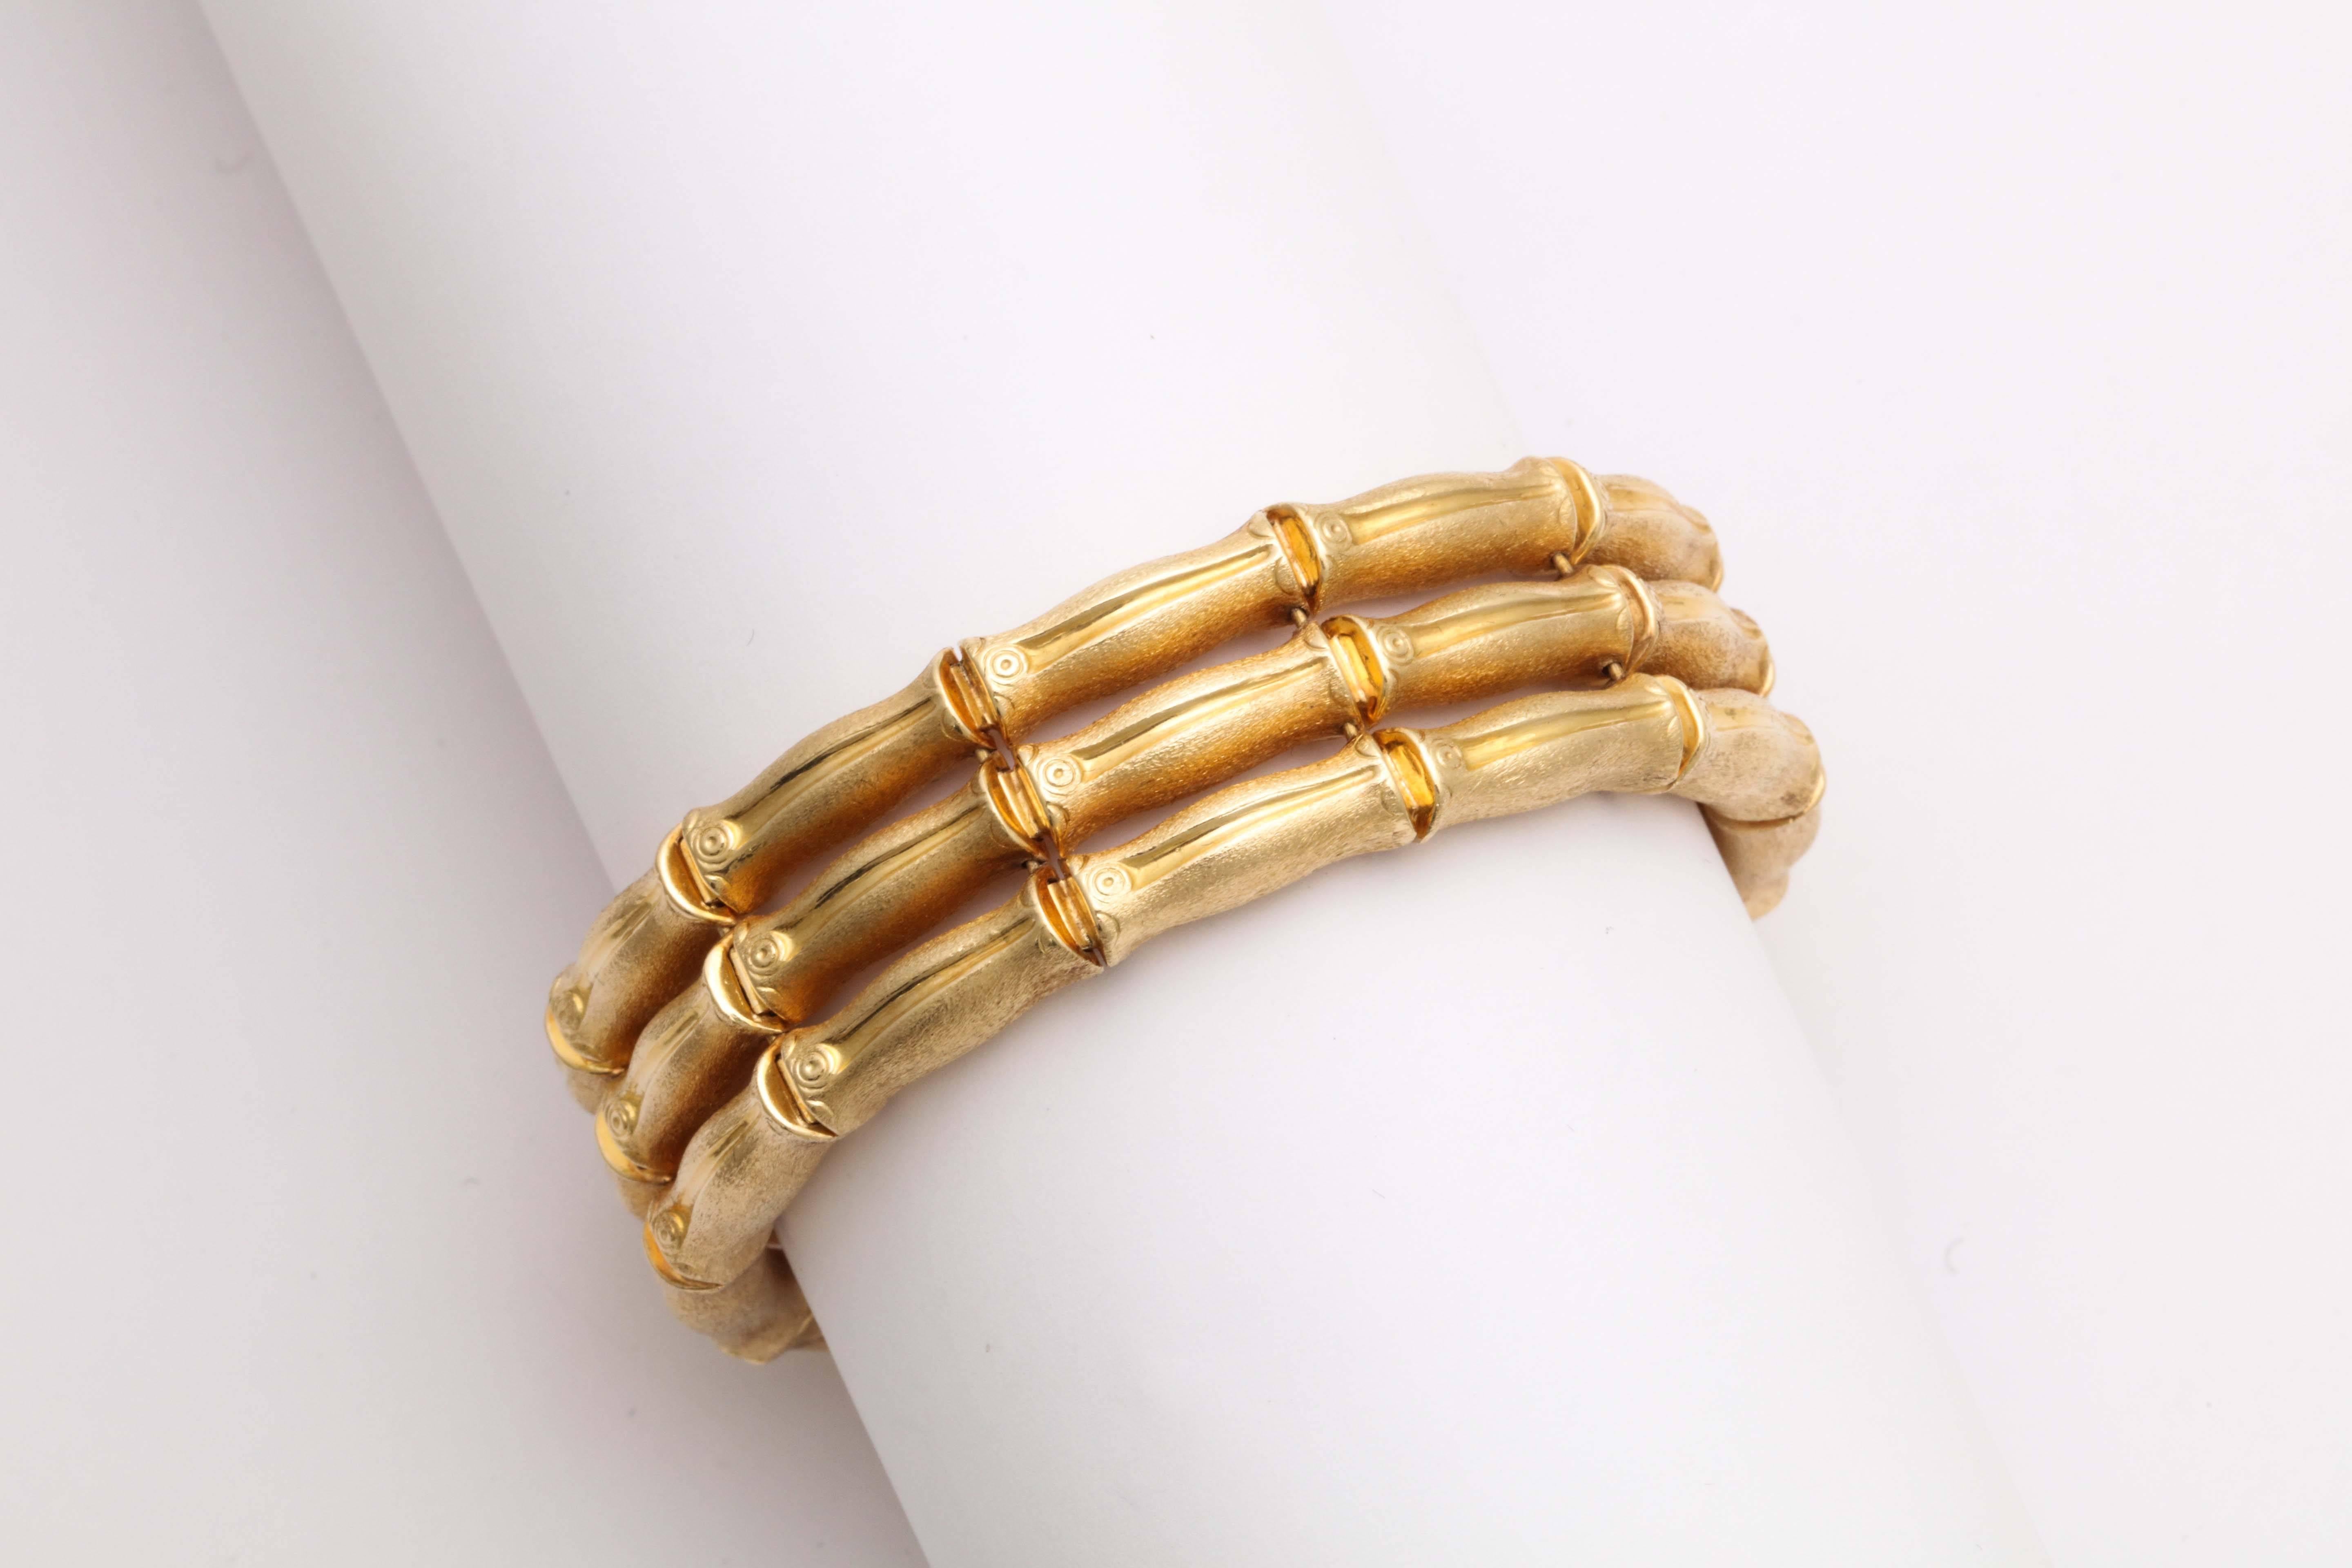 Italian Bamboo Bracelet with brushed finish.  18kt Yellow Gold Bracelet made up of  3 rows of Bamboo segments.  Very chic yet carefree.  Marked 750 in lozenge shaped mark.  Perfect for any occasion and at any time of day.